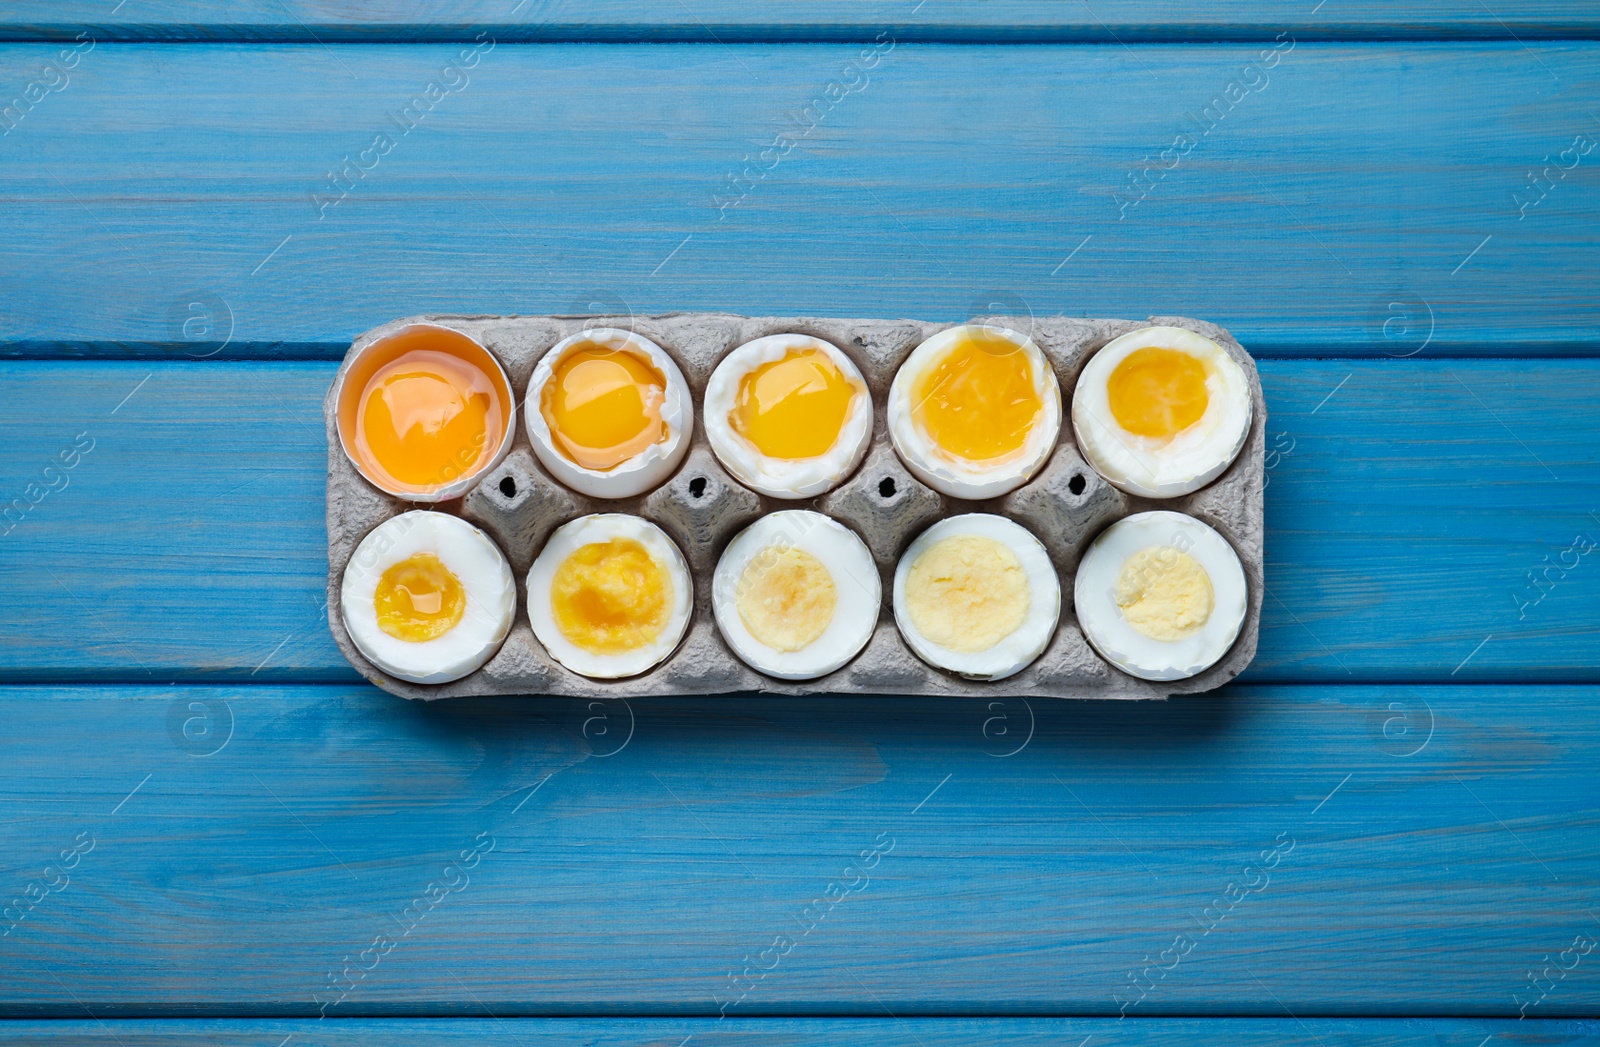 Photo of Boiled chicken eggs of different readiness stages in carton on blue wooden table, top view